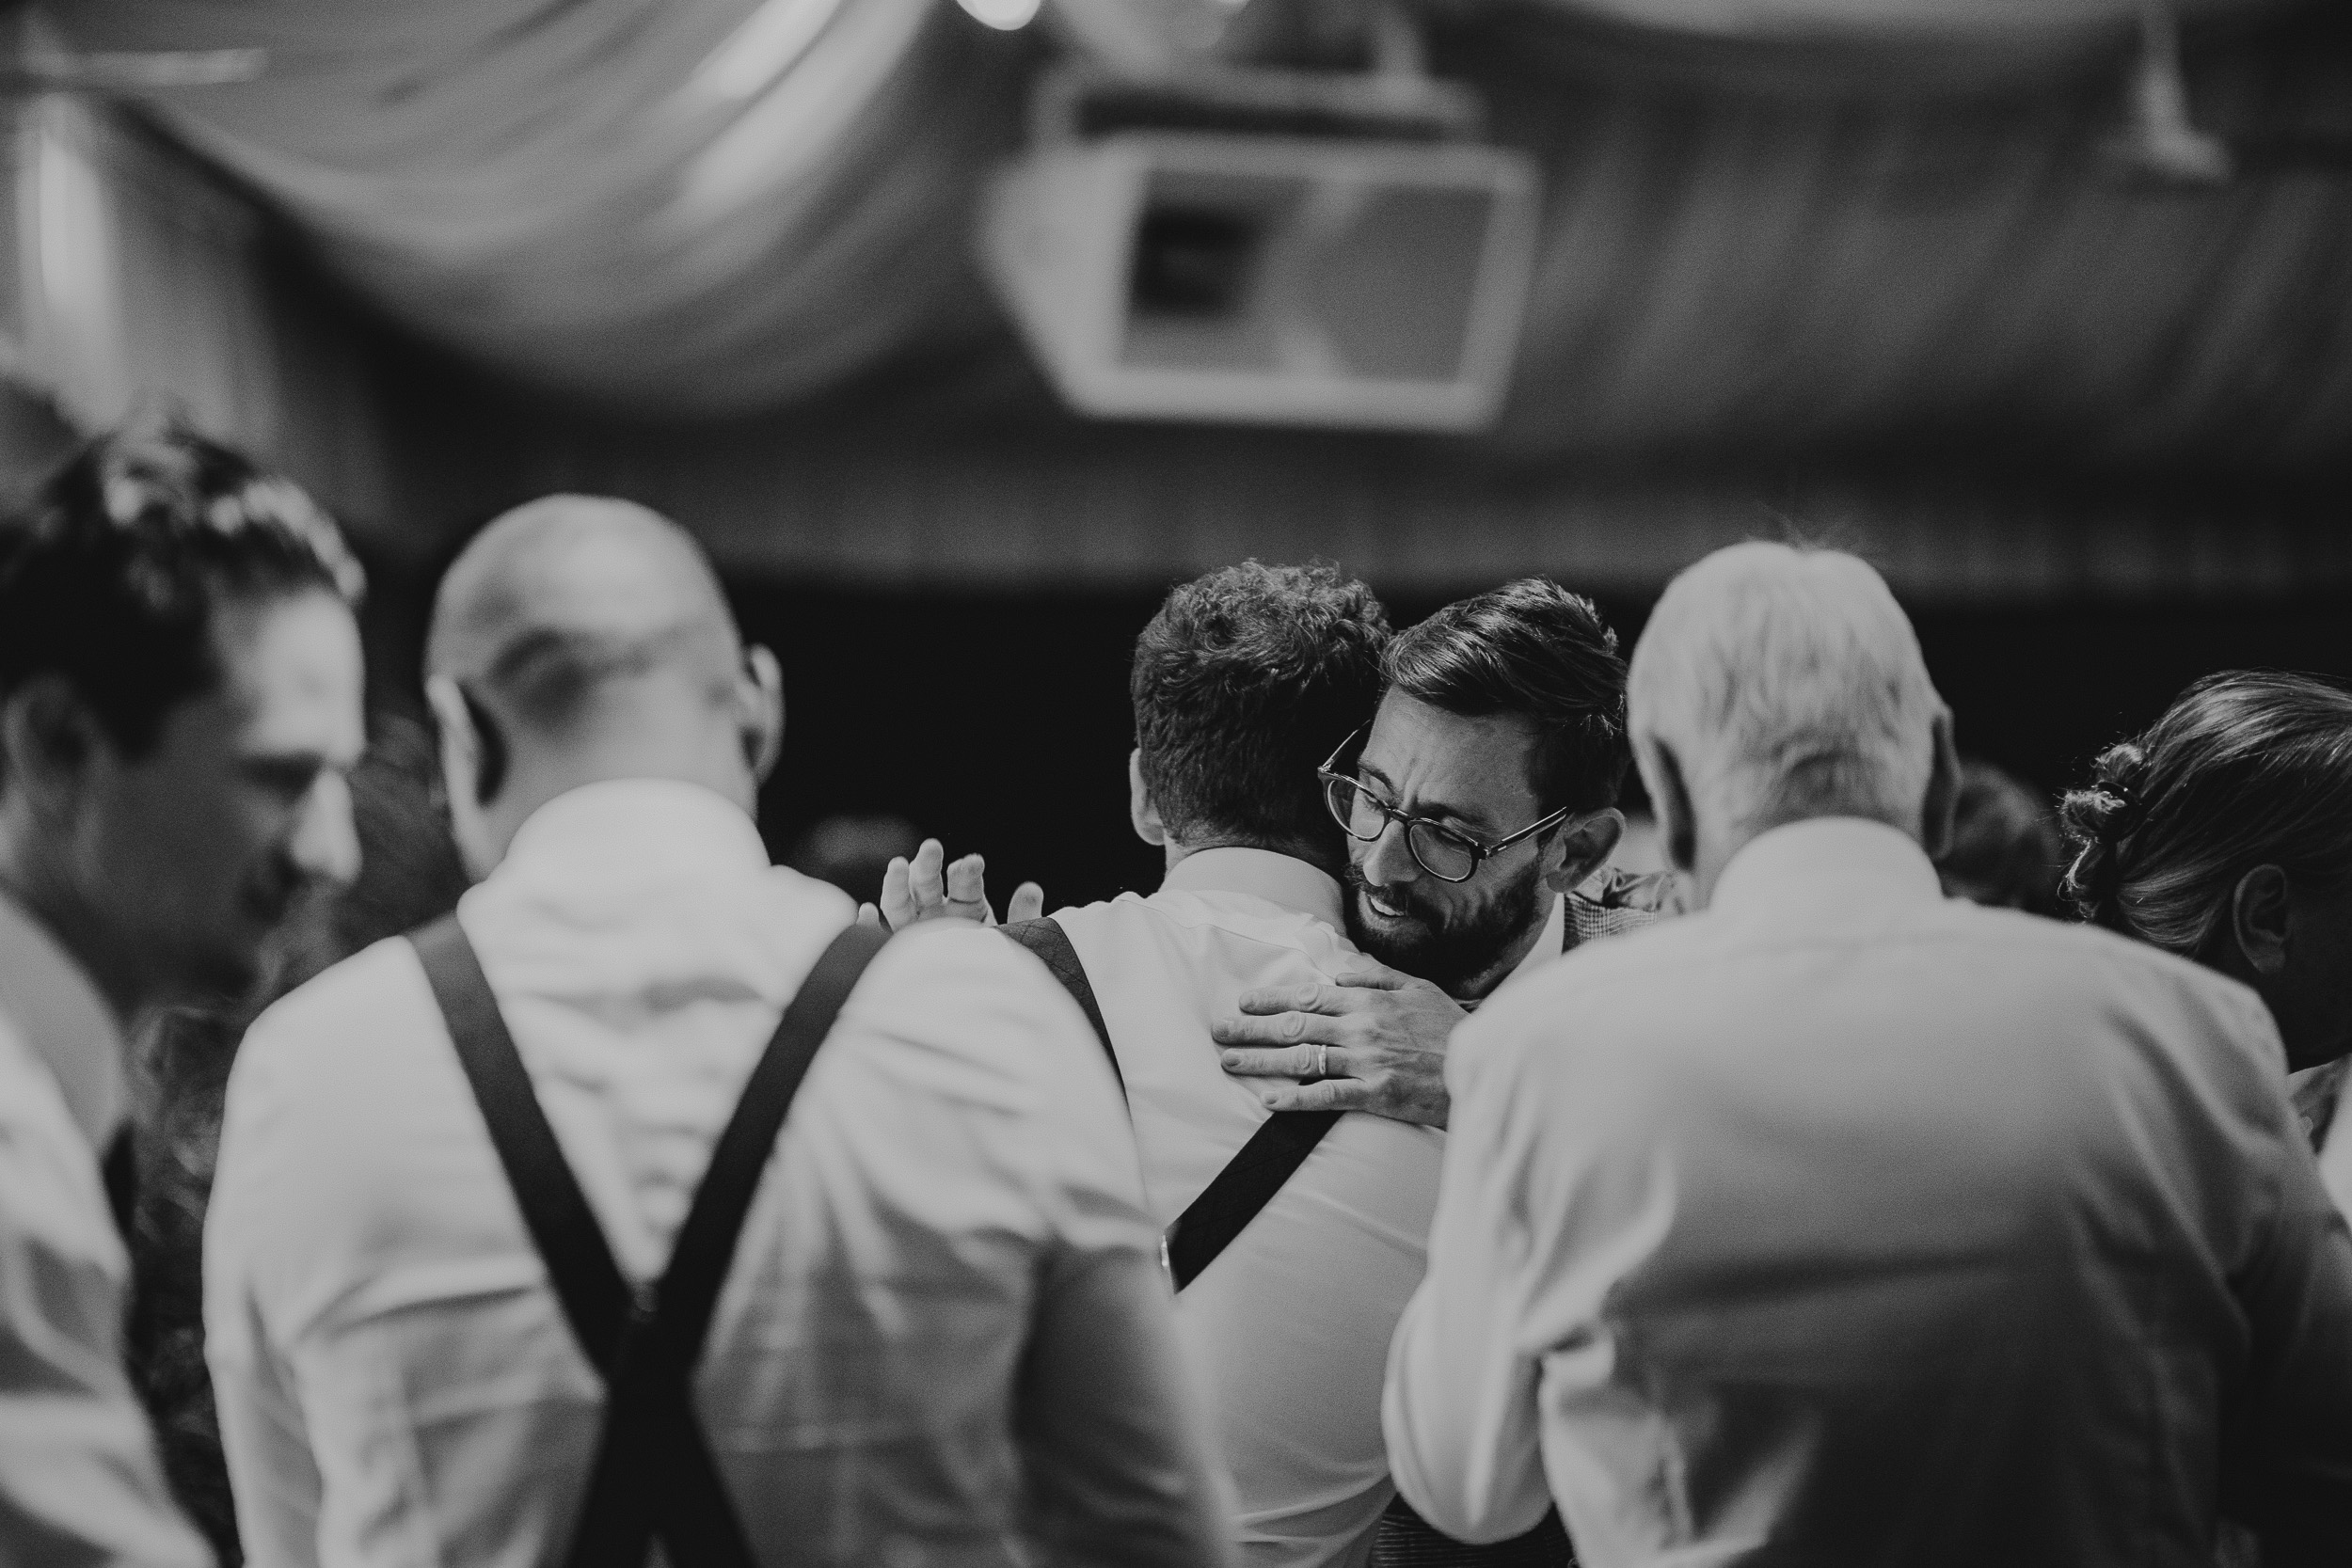 A group of men hugging each other at a Surrey wedding.